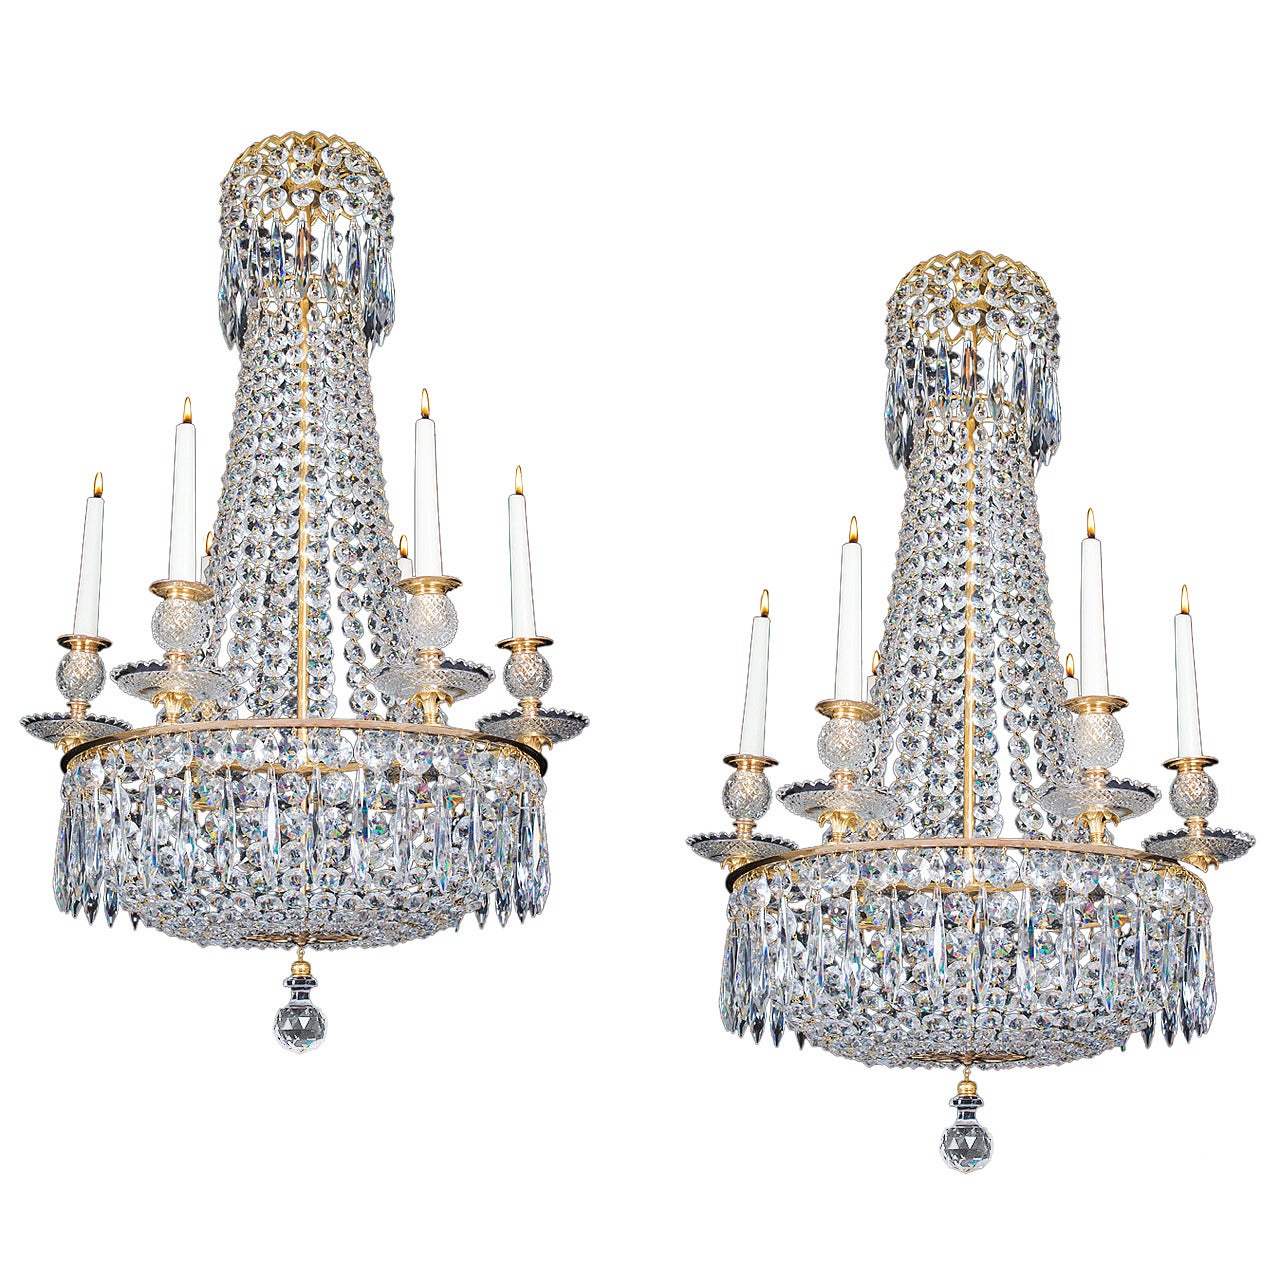 Small Pair of Classic Regency Chandeliers by John Blades